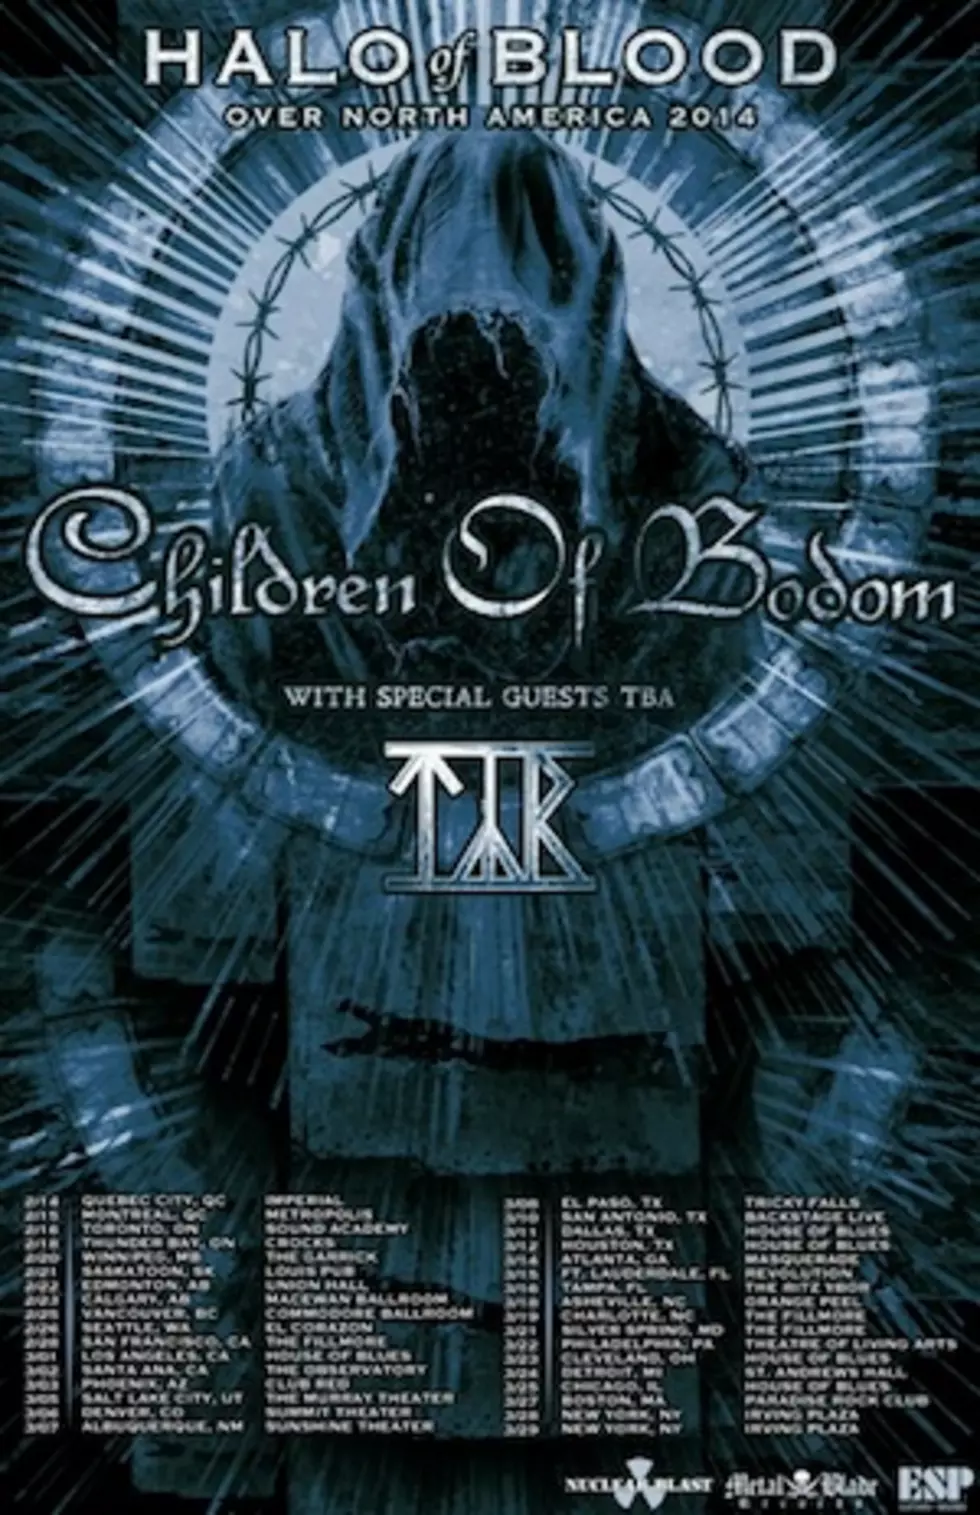 Children of Bodom Announce 2014 North American Tour With Týr